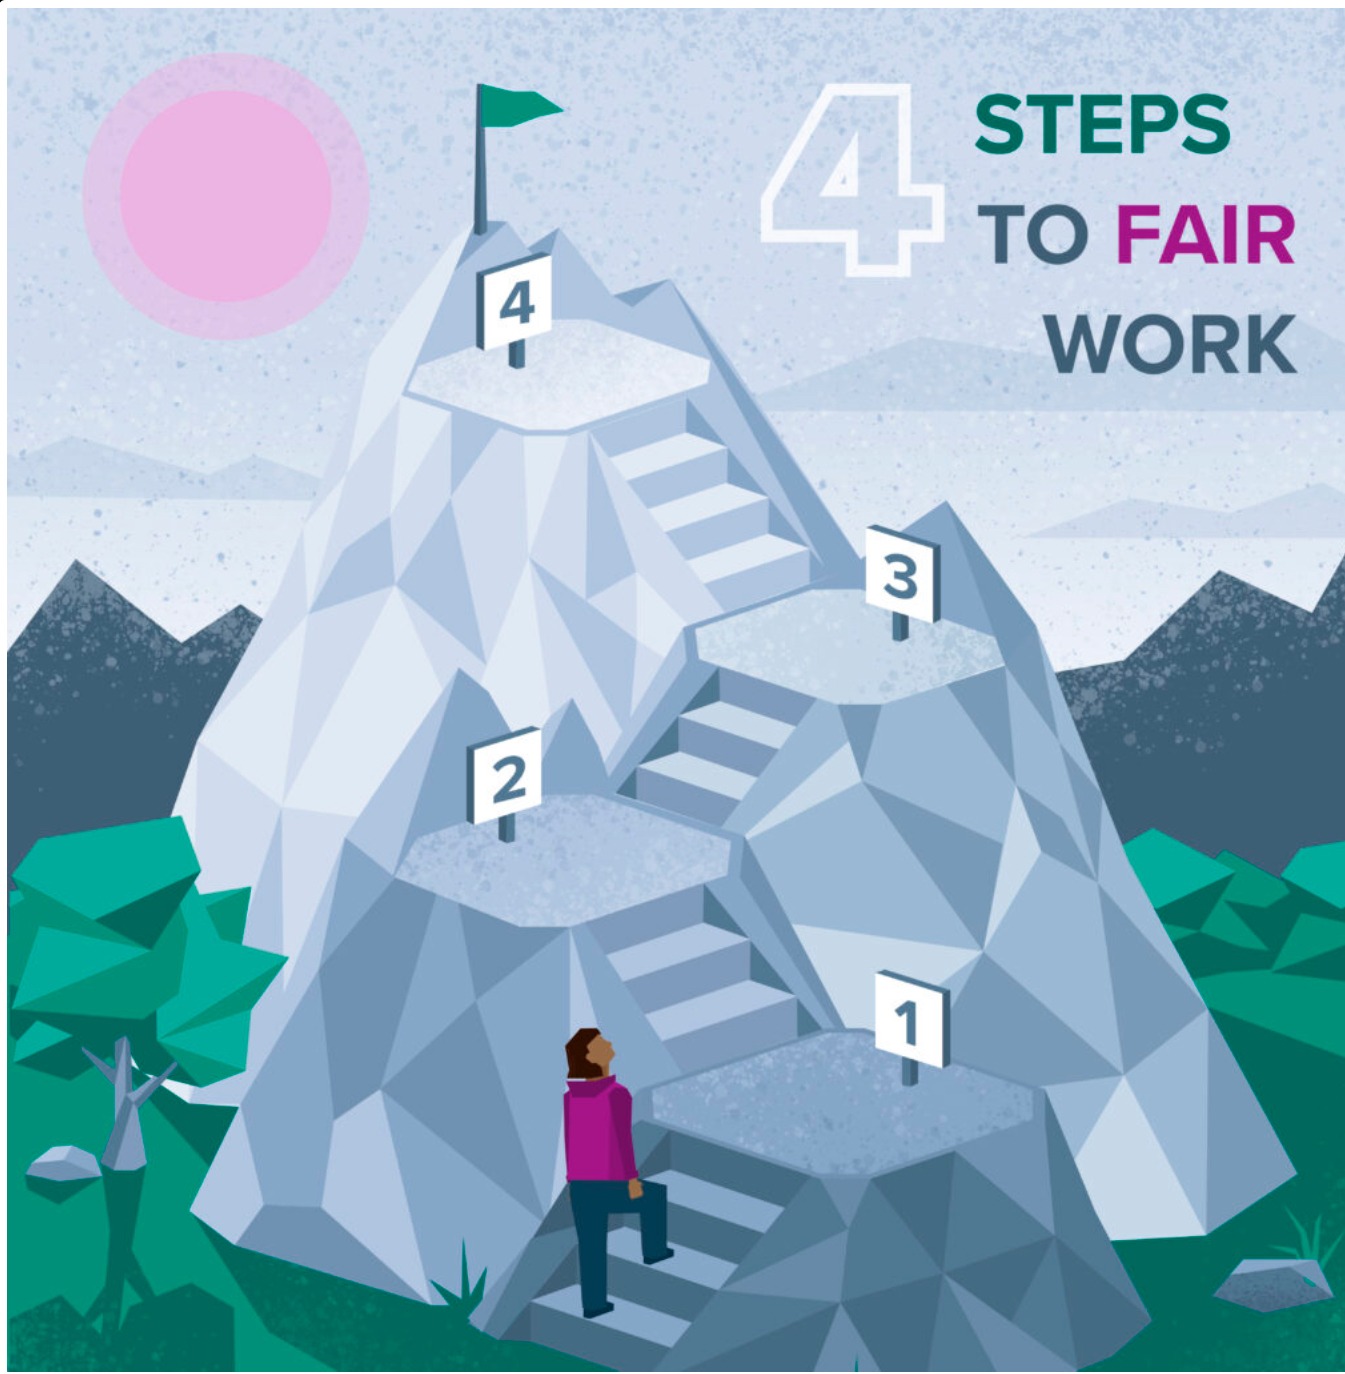 4 Steps to fair pay image spread out on a mountain side.